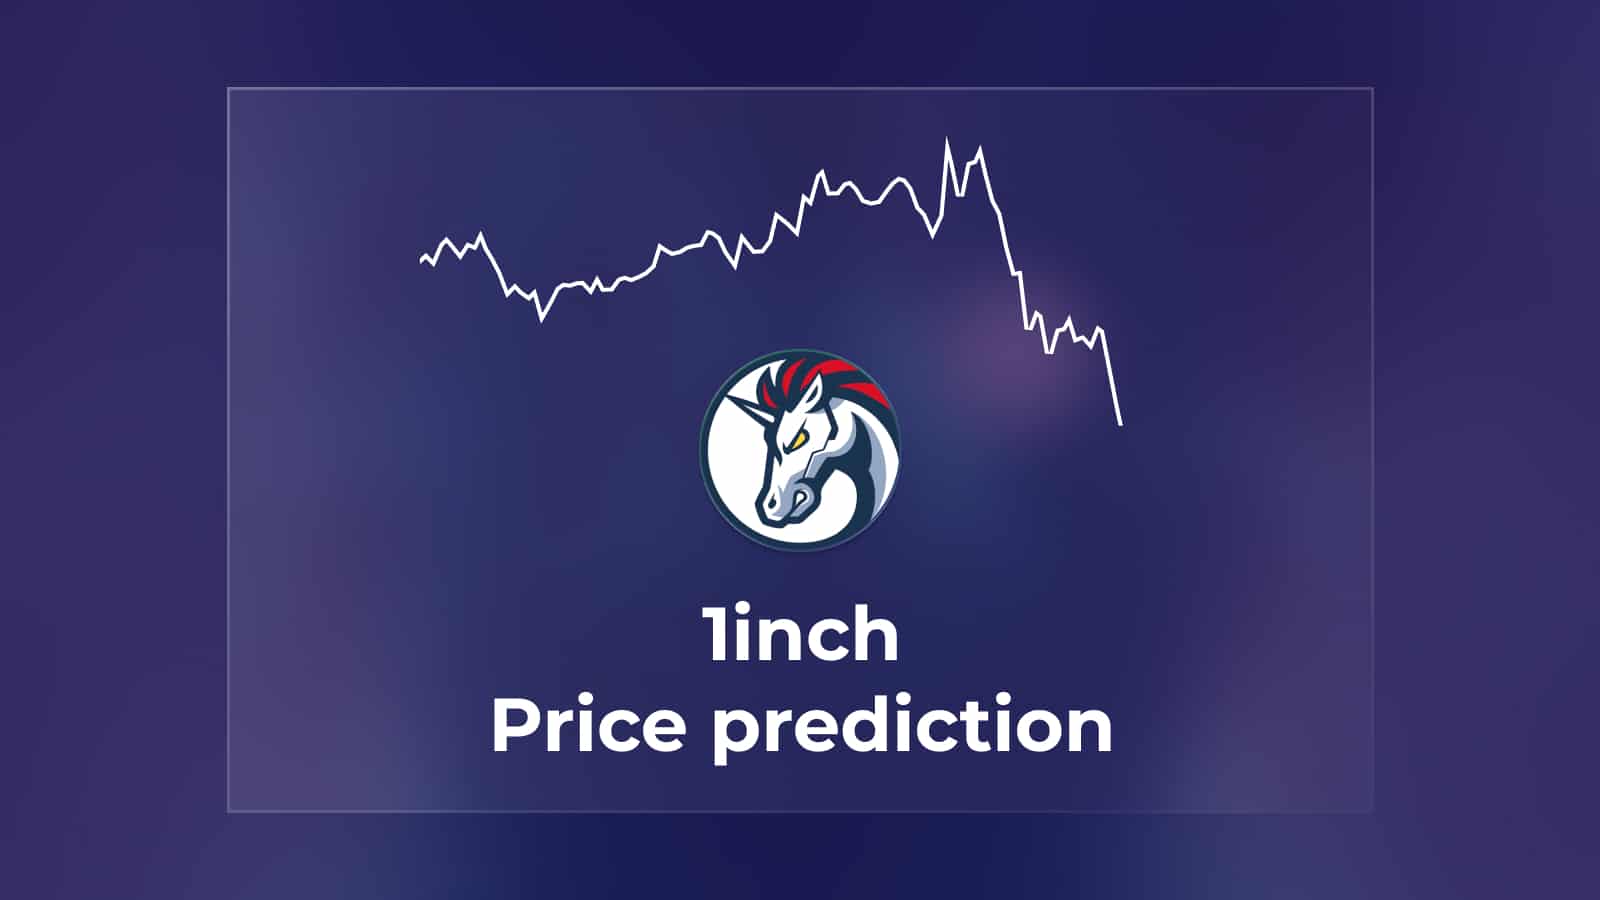 1Inch Price Prediction Featured Image 1